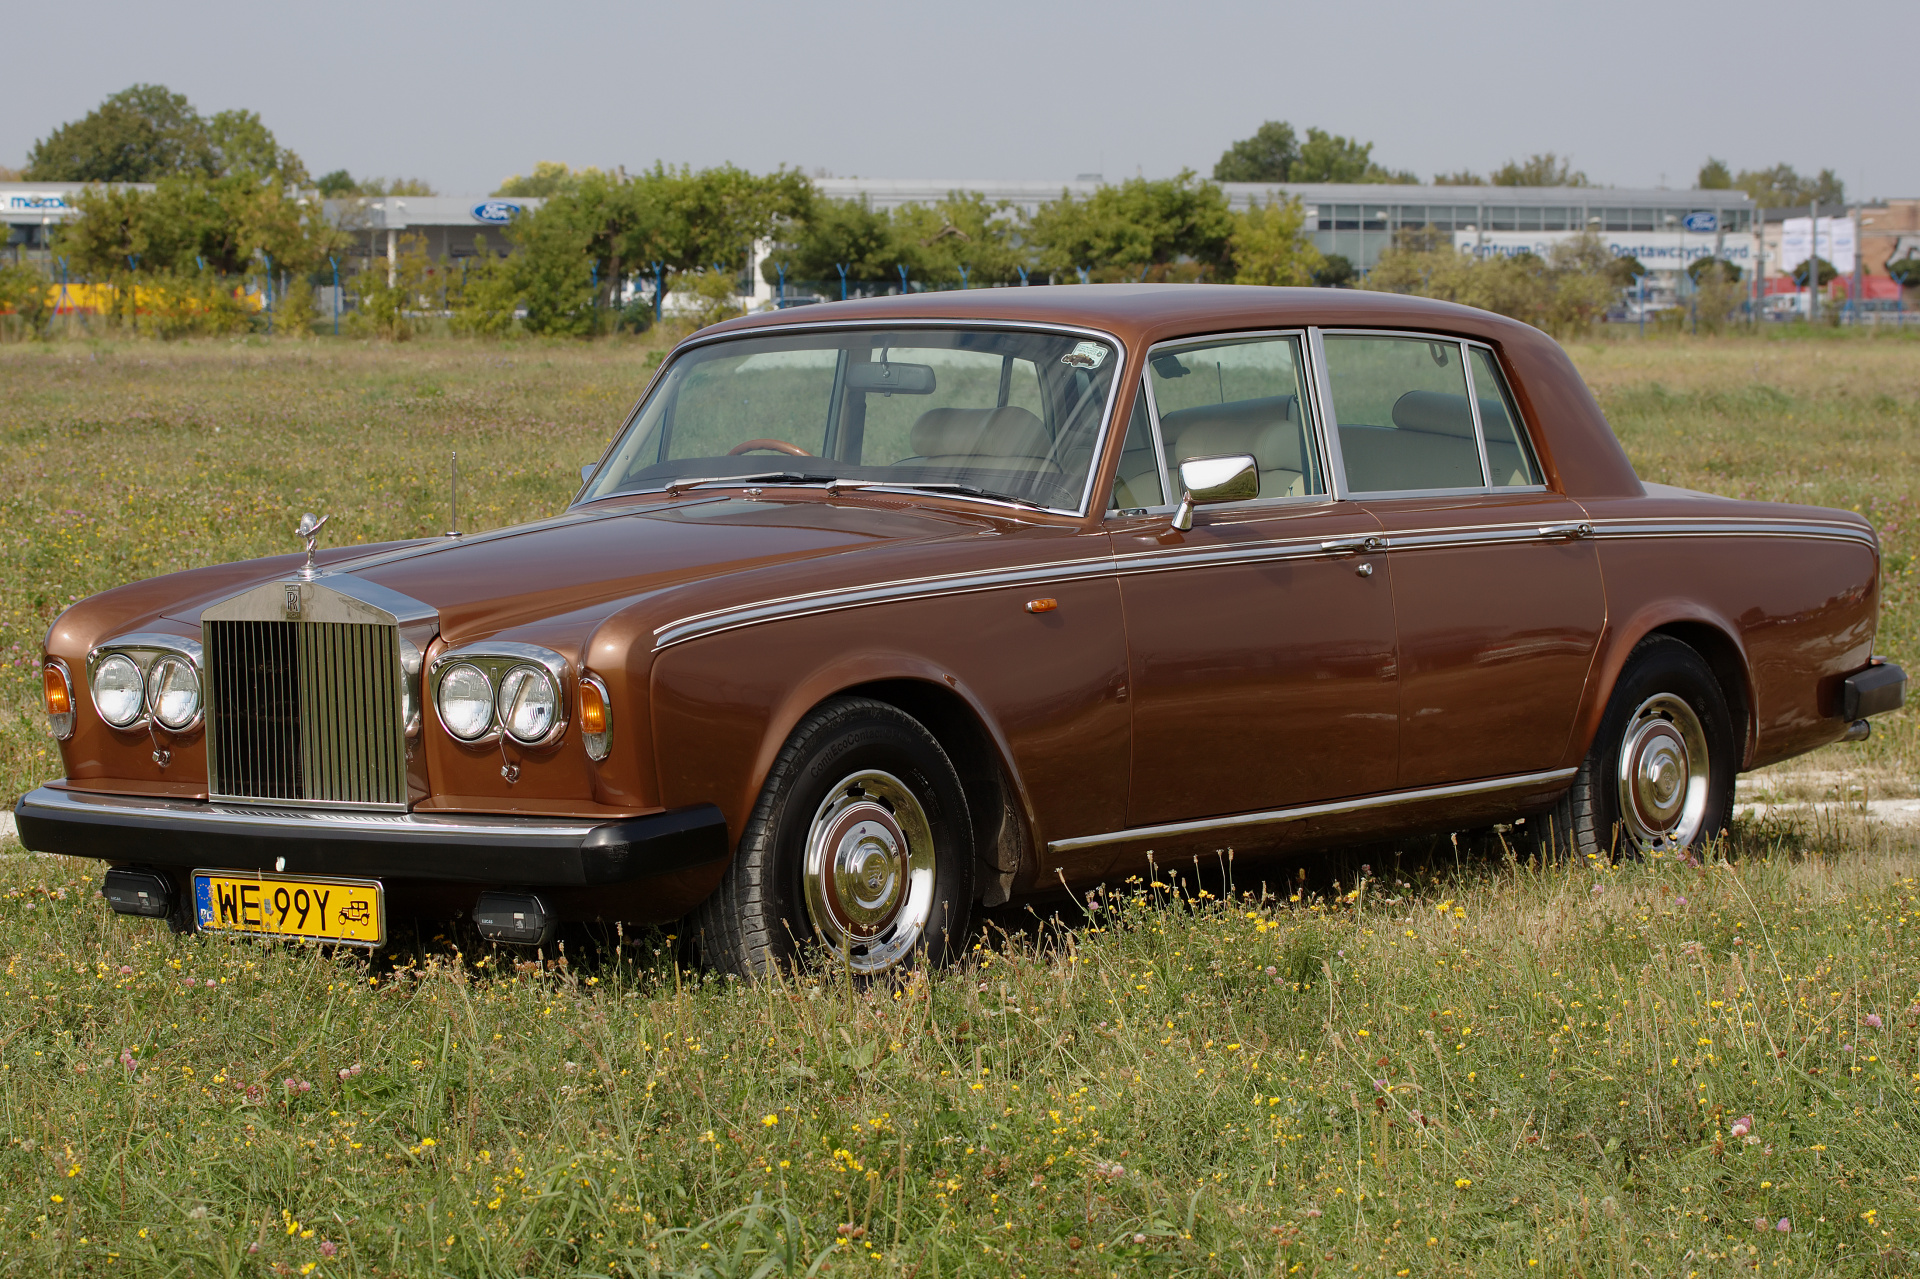 Rolls-Royce Silver Shadow (Vehicles » Vintage cars and buses)